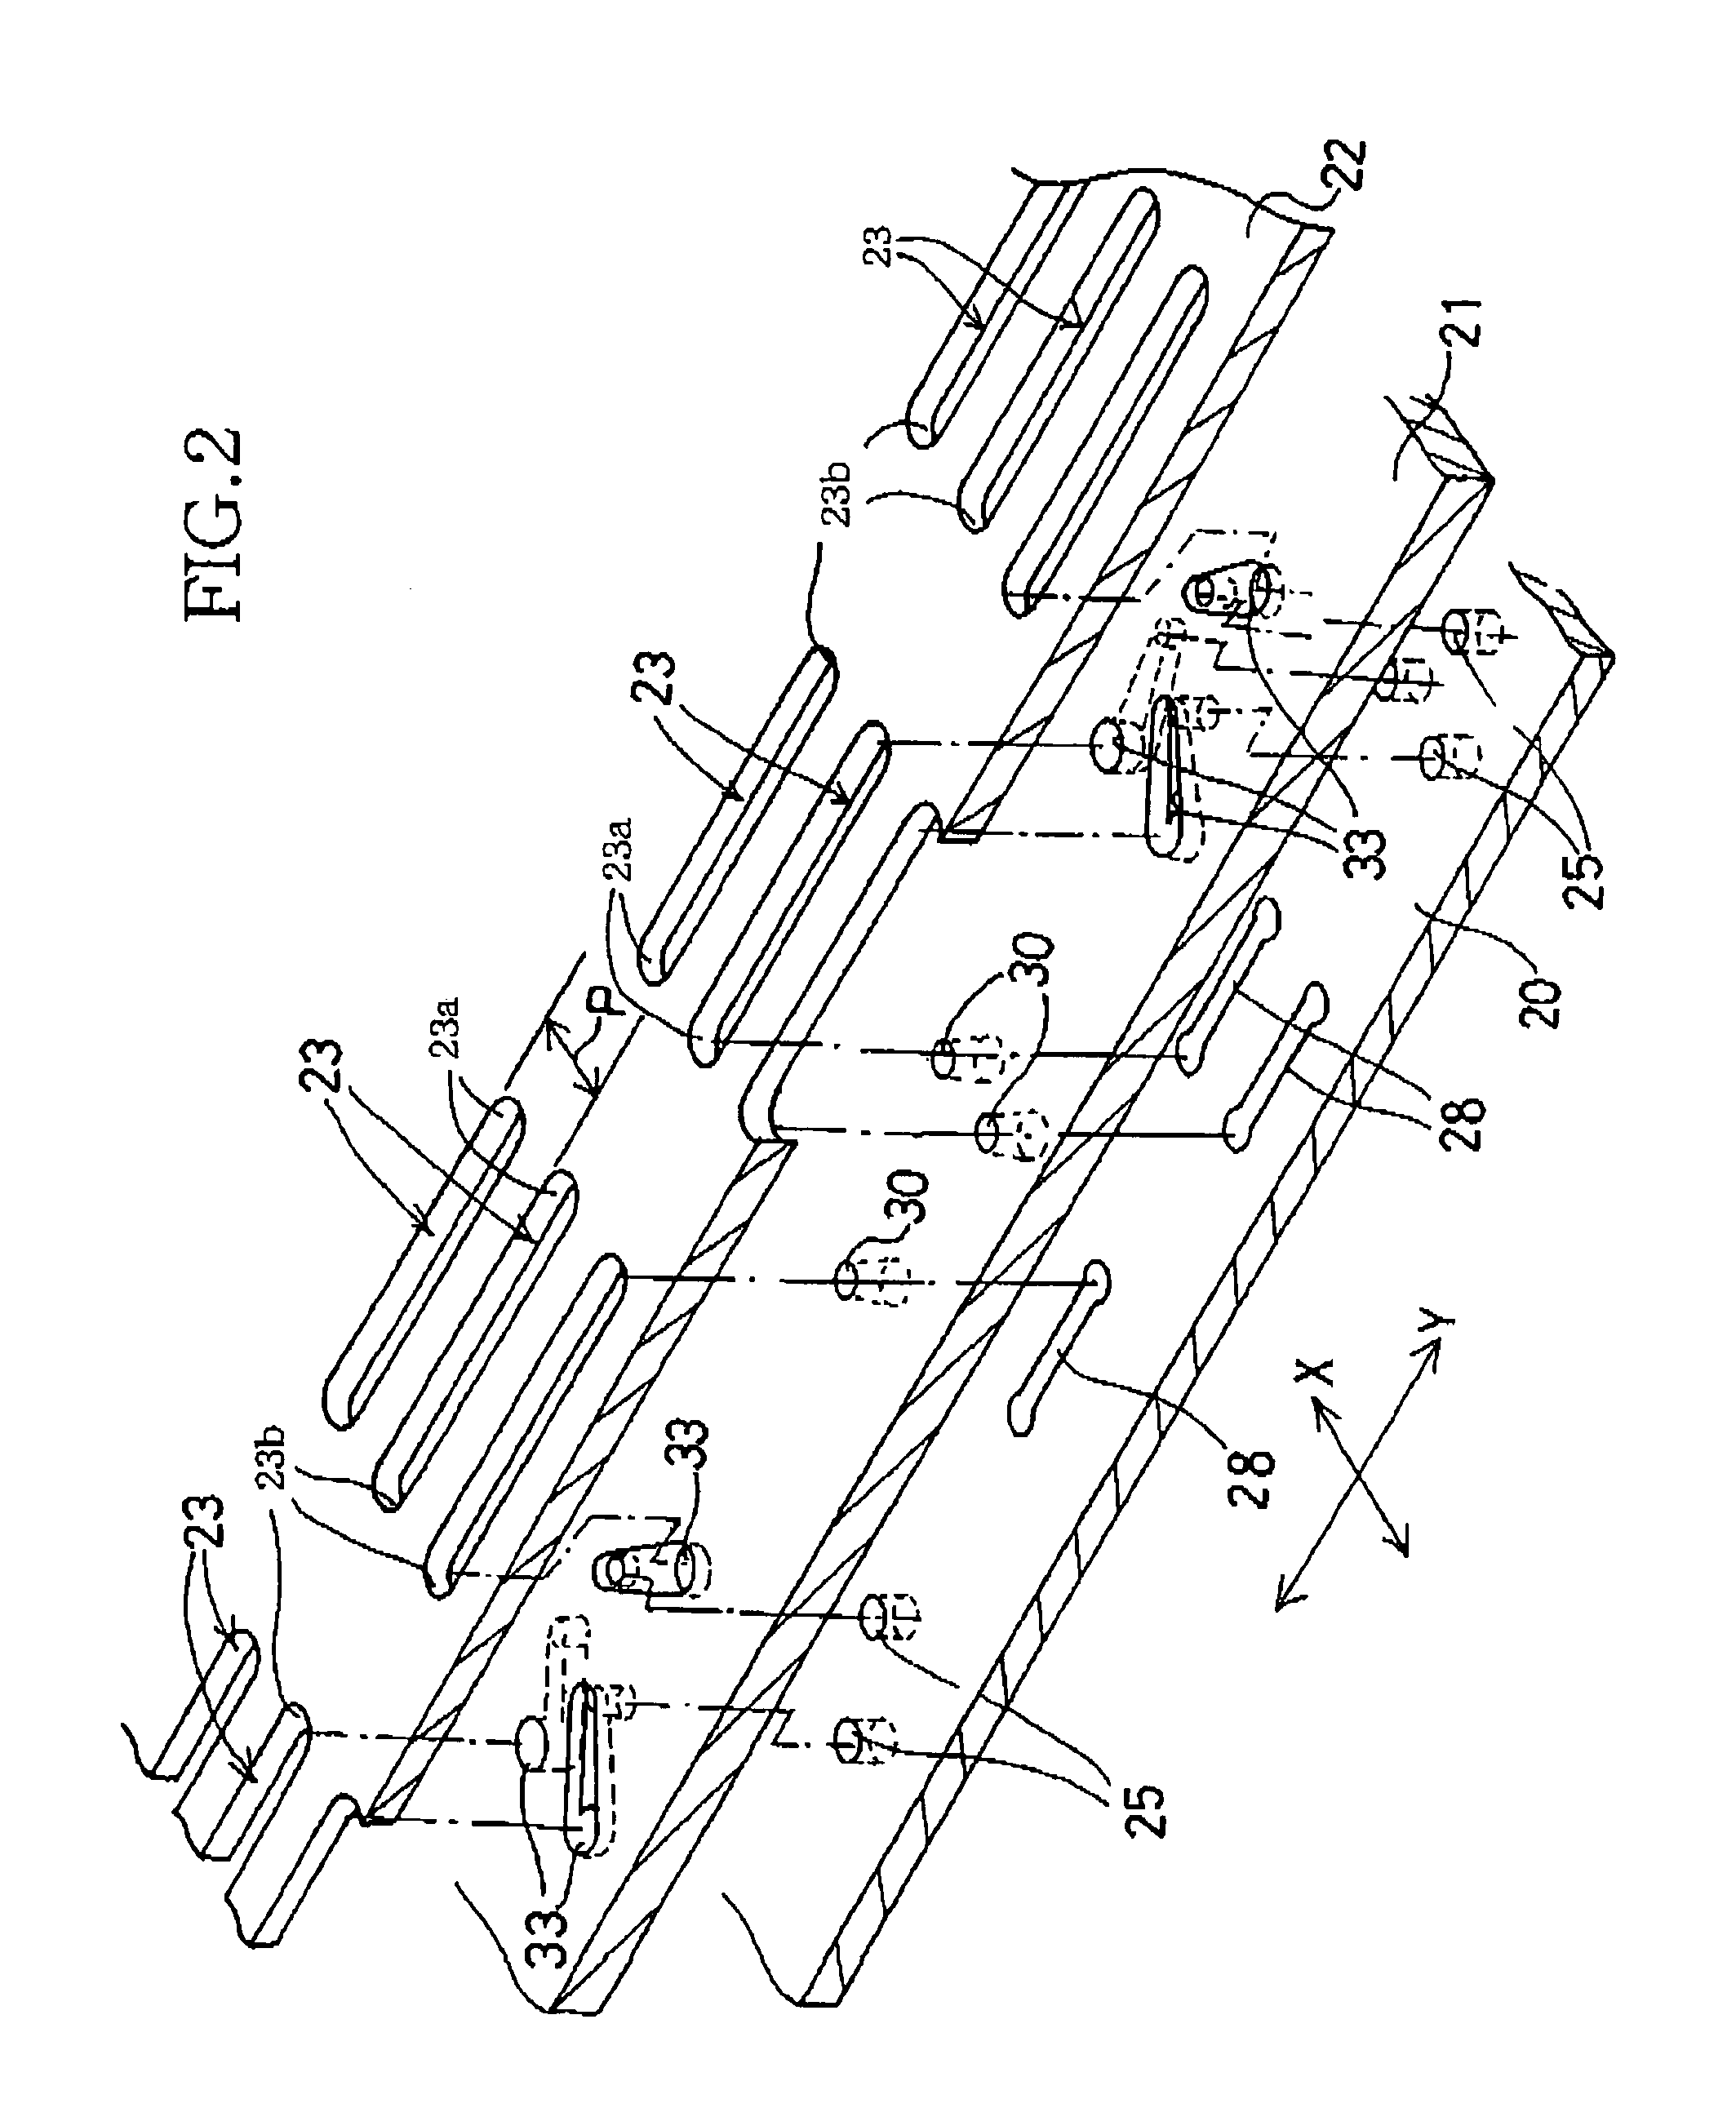 Sheet-member stacked structure, lead frame, lead-frame stacked structure, sheet-member stacked and adhered structure, and ink jet printer head